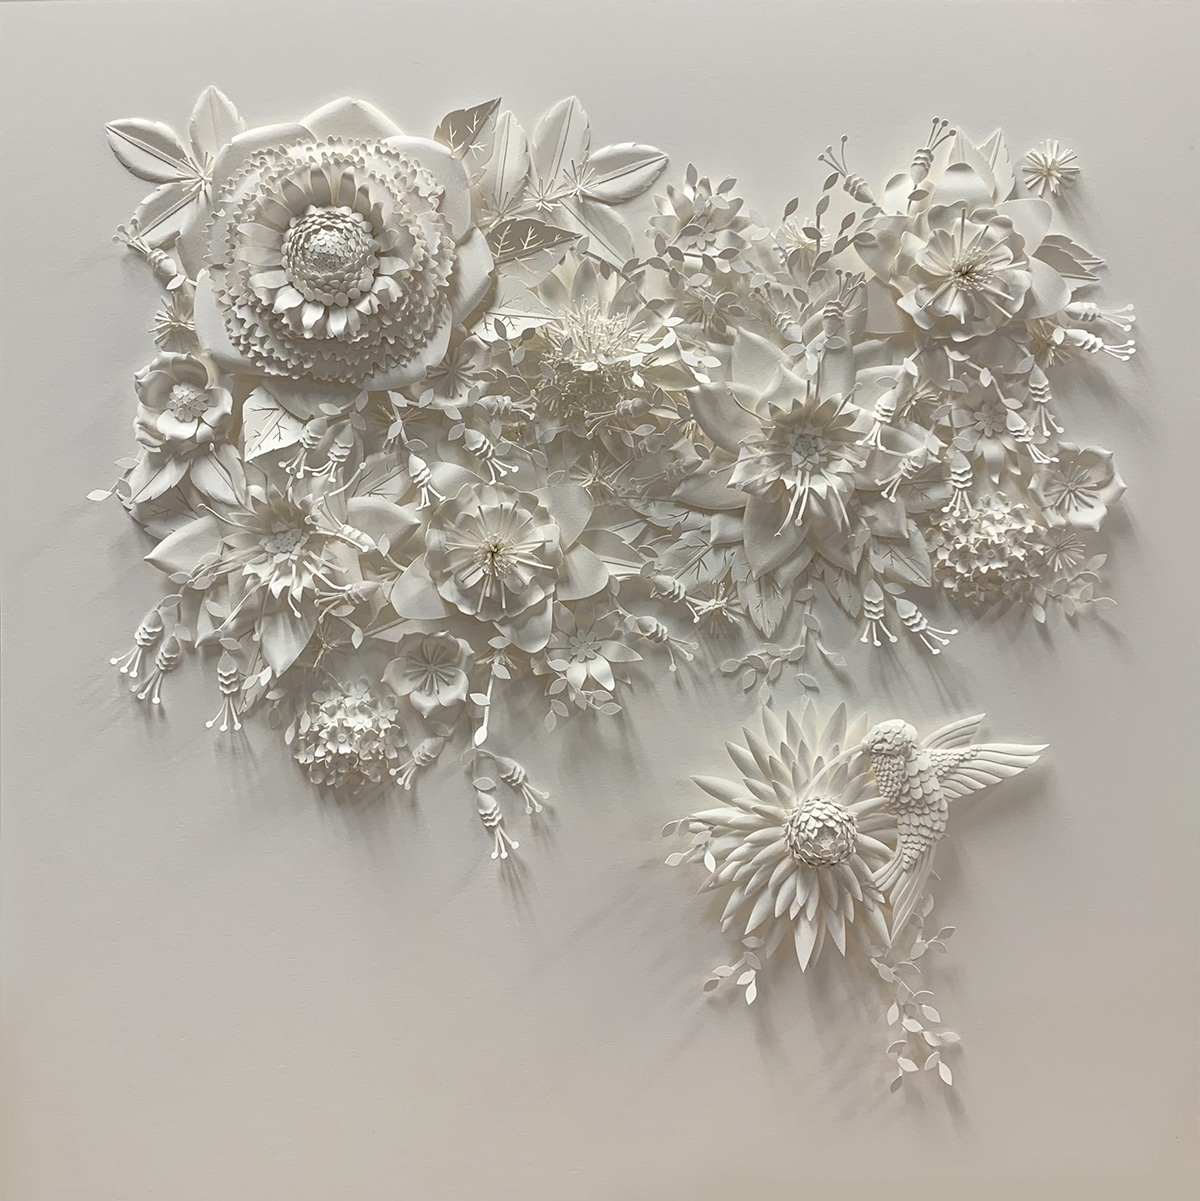 Exquisitely Cut Paper Sculptures by Rogan Brown Highlight the